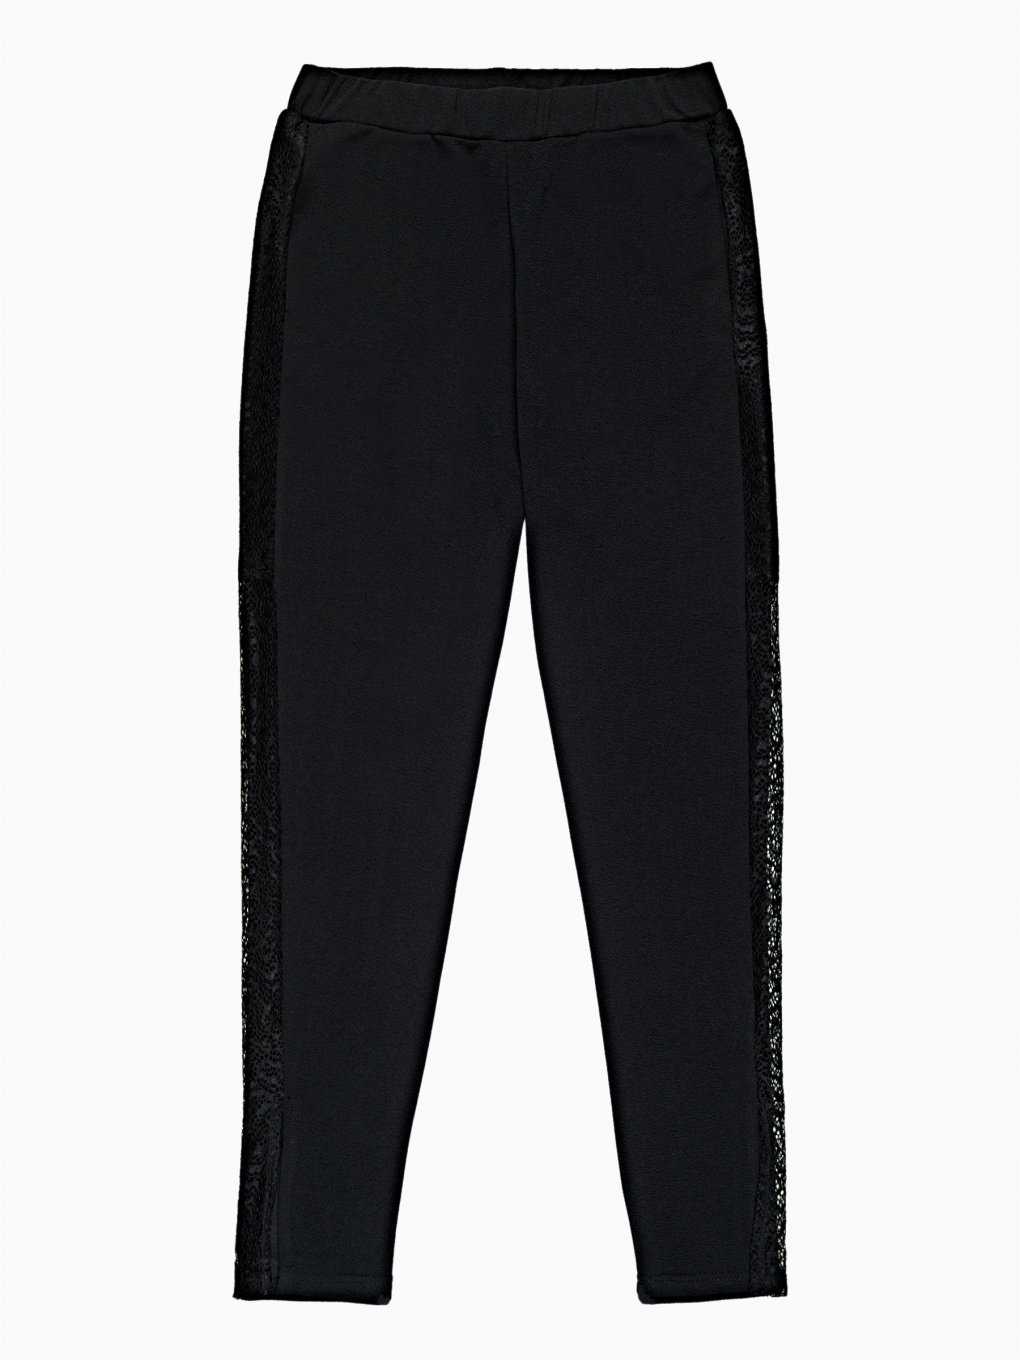 Trousers with lace panel